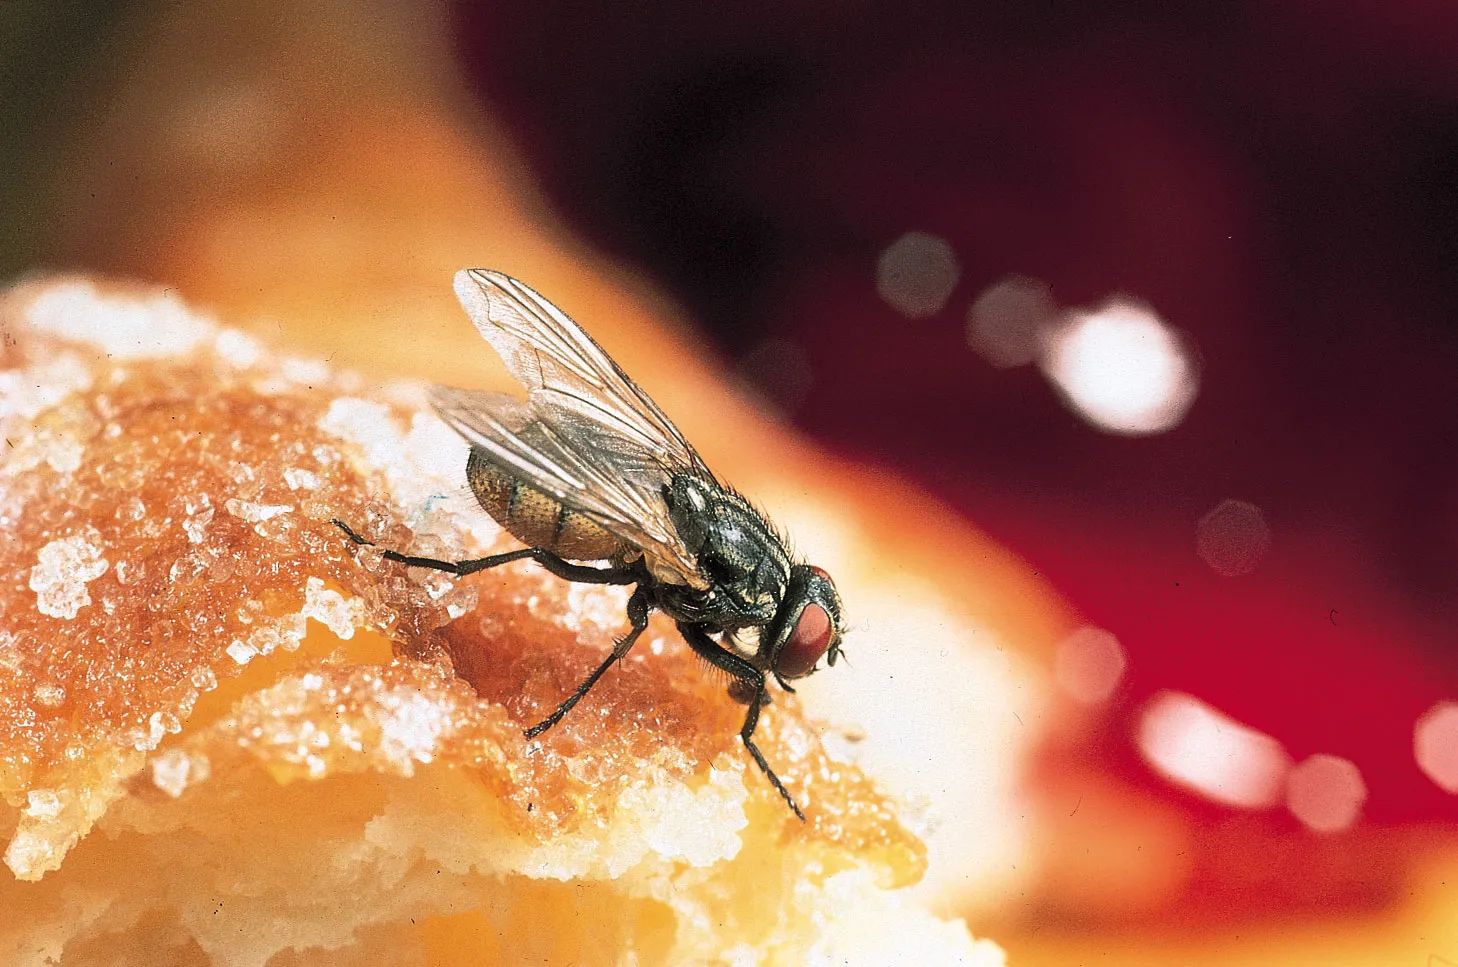 How Long Can a Fly Survive Without Food